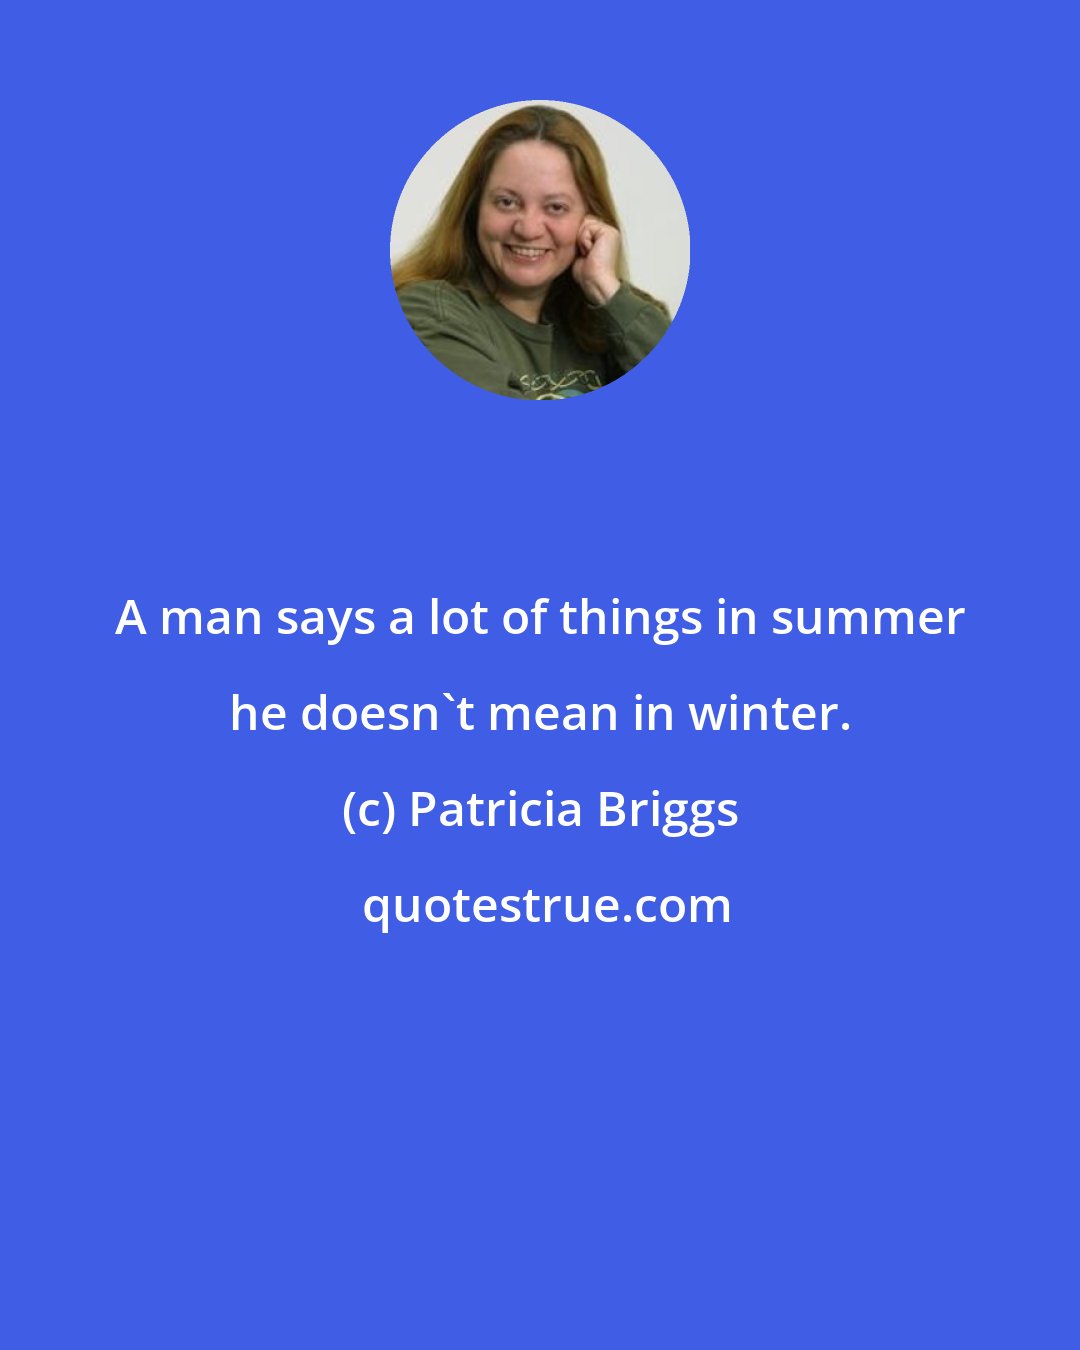 Patricia Briggs: A man says a lot of things in summer he doesn't mean in winter.